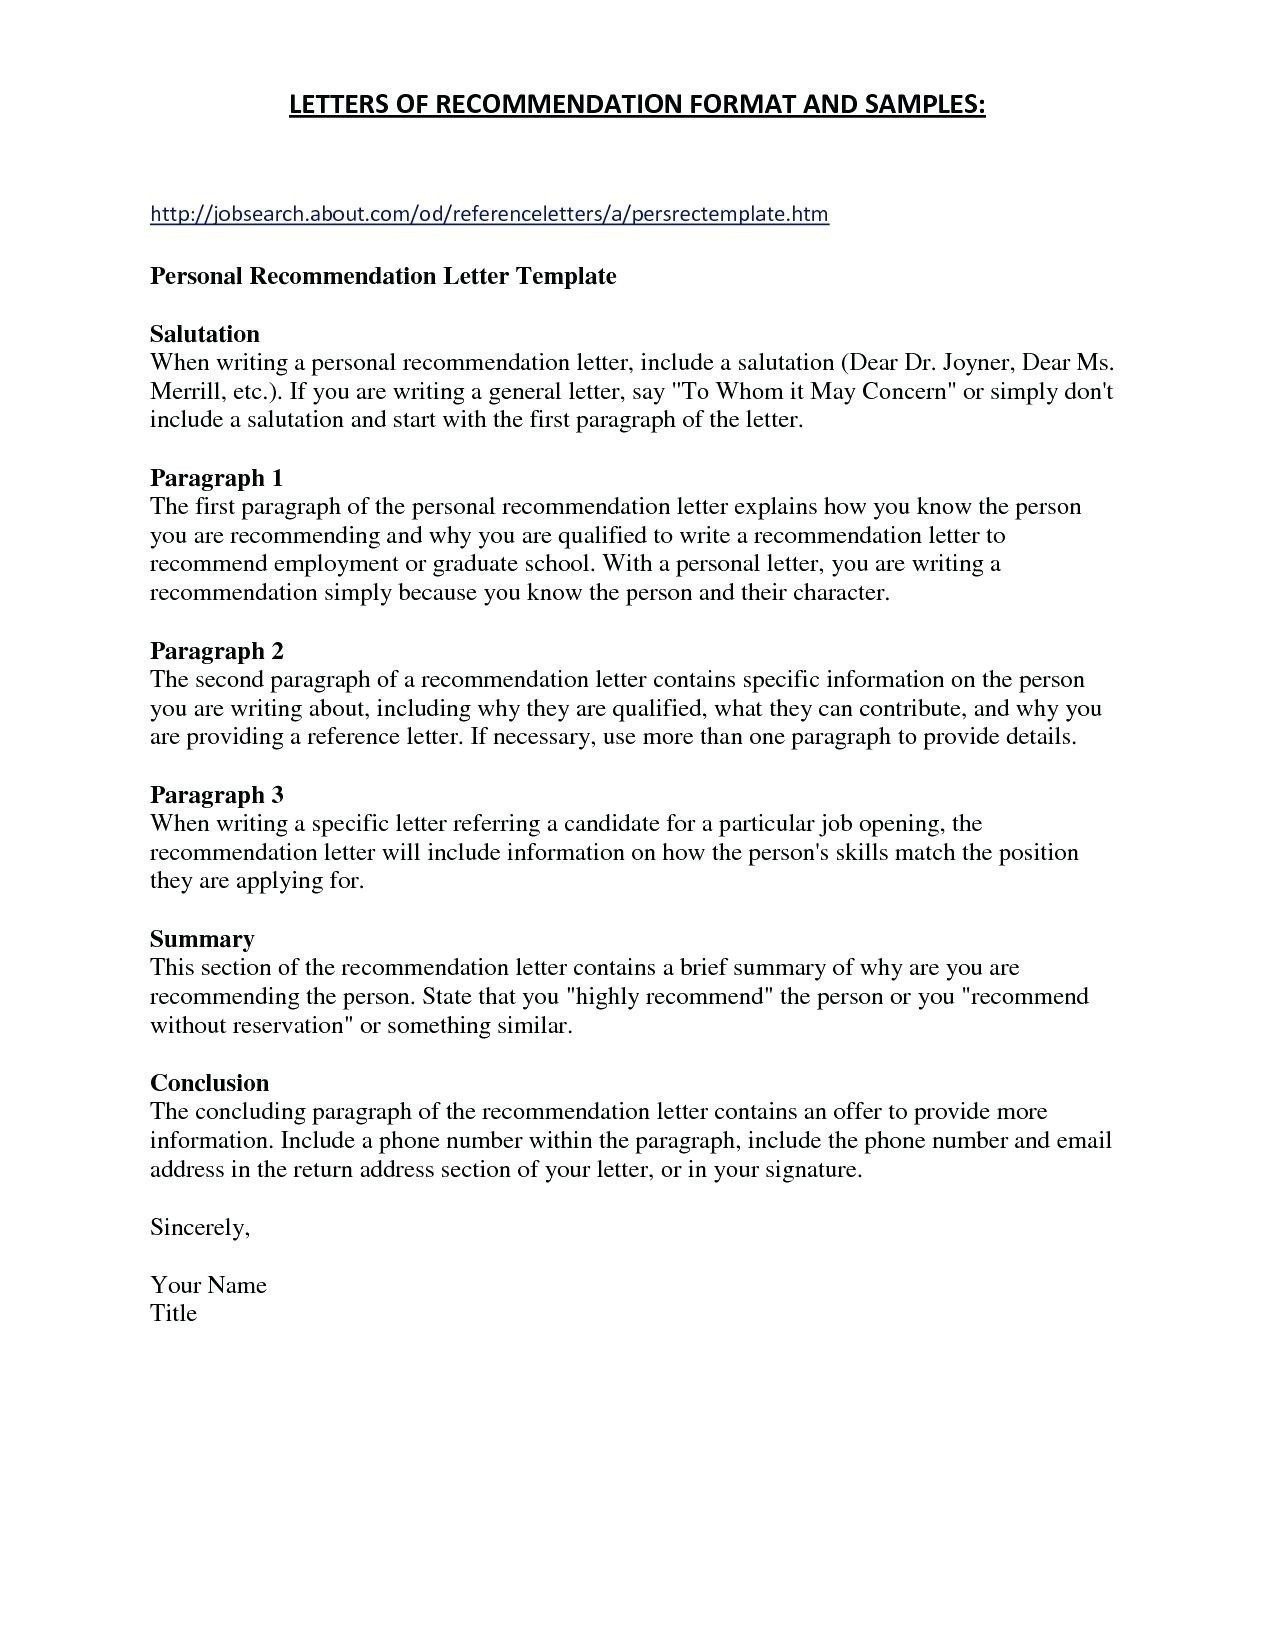 Contract Termination Letter Template - Letter Re Mendation for Employee Termination Template Best